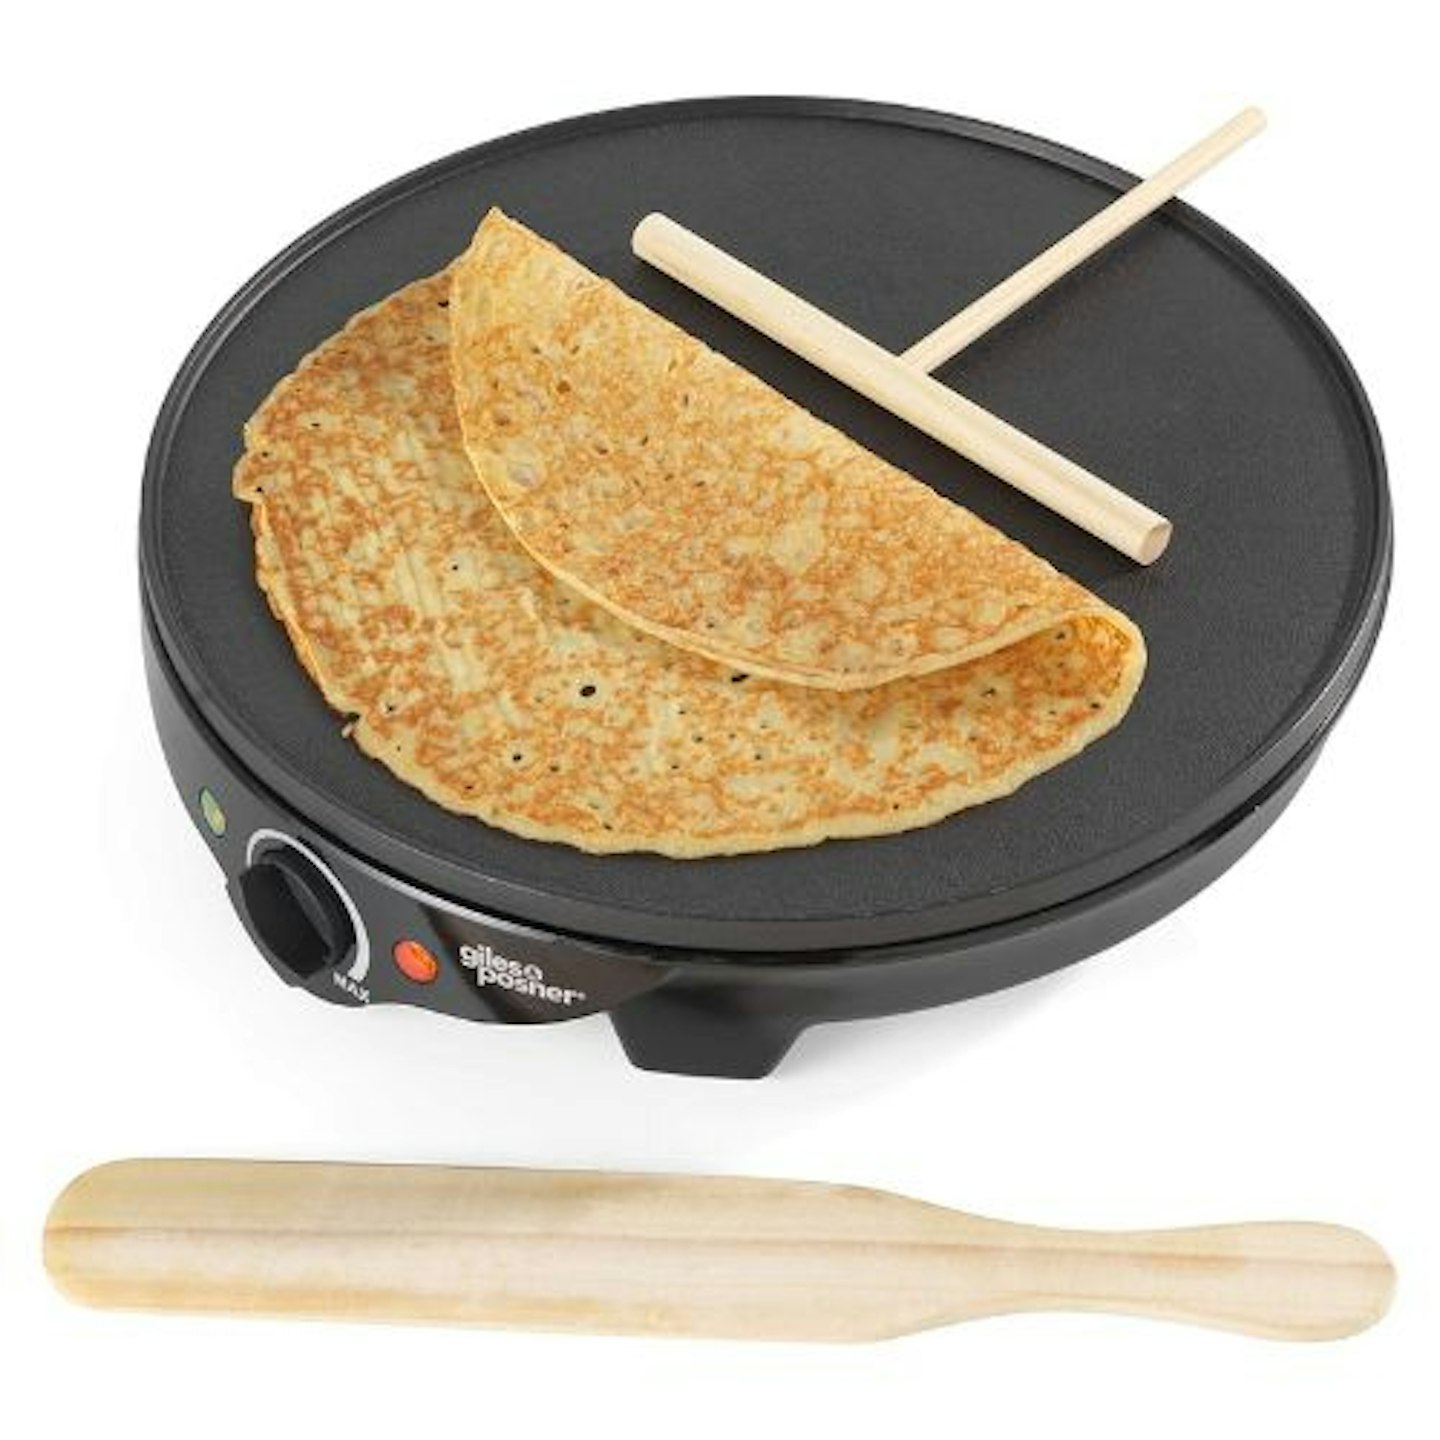 https://images.bauerhosting.com/affiliates/sites/10/2023/02/Giles-Posner-EK2510G-Pancake-Maker-Machine-for-Crepes-Electric-Non-Stick-Hot-Plate-Pan-Indoor-Tabletop-Adjustable-Temperature-Control-Includes-Wooden-Spreader-Spatula-30cm12-Inch-1300-W-1.jpg?auto=format&w=1440&q=80